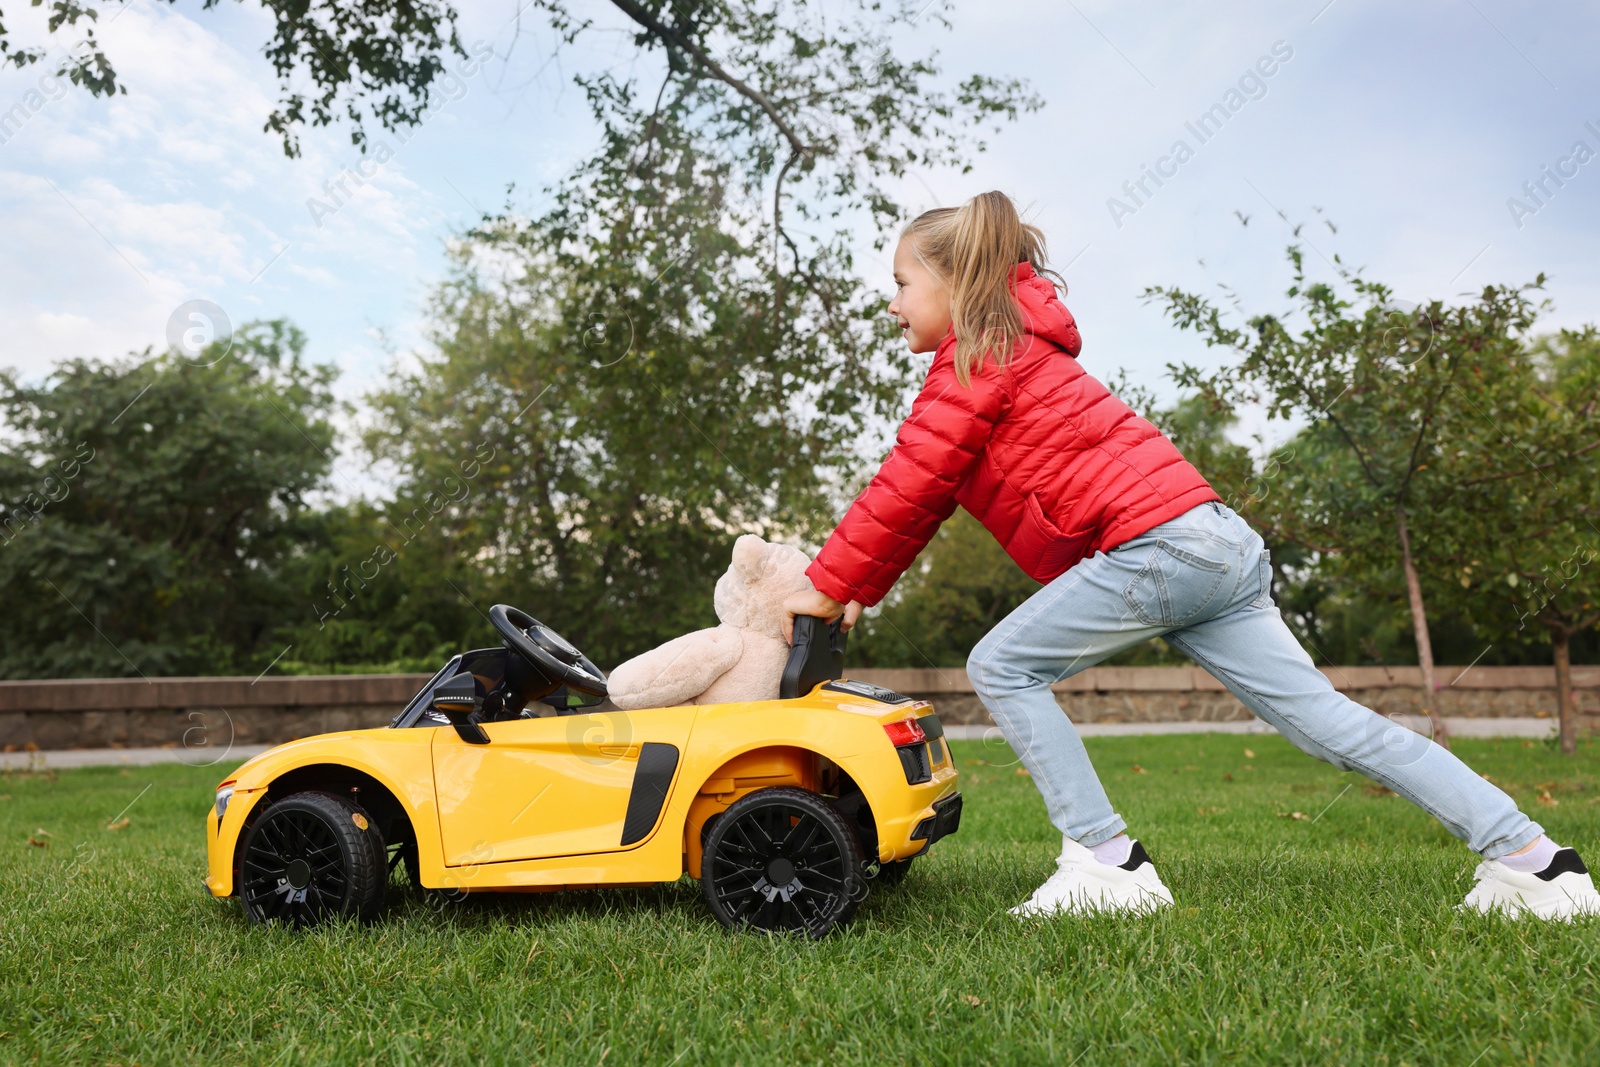 Photo of Cute little girl playing with toy bear and children's car in park